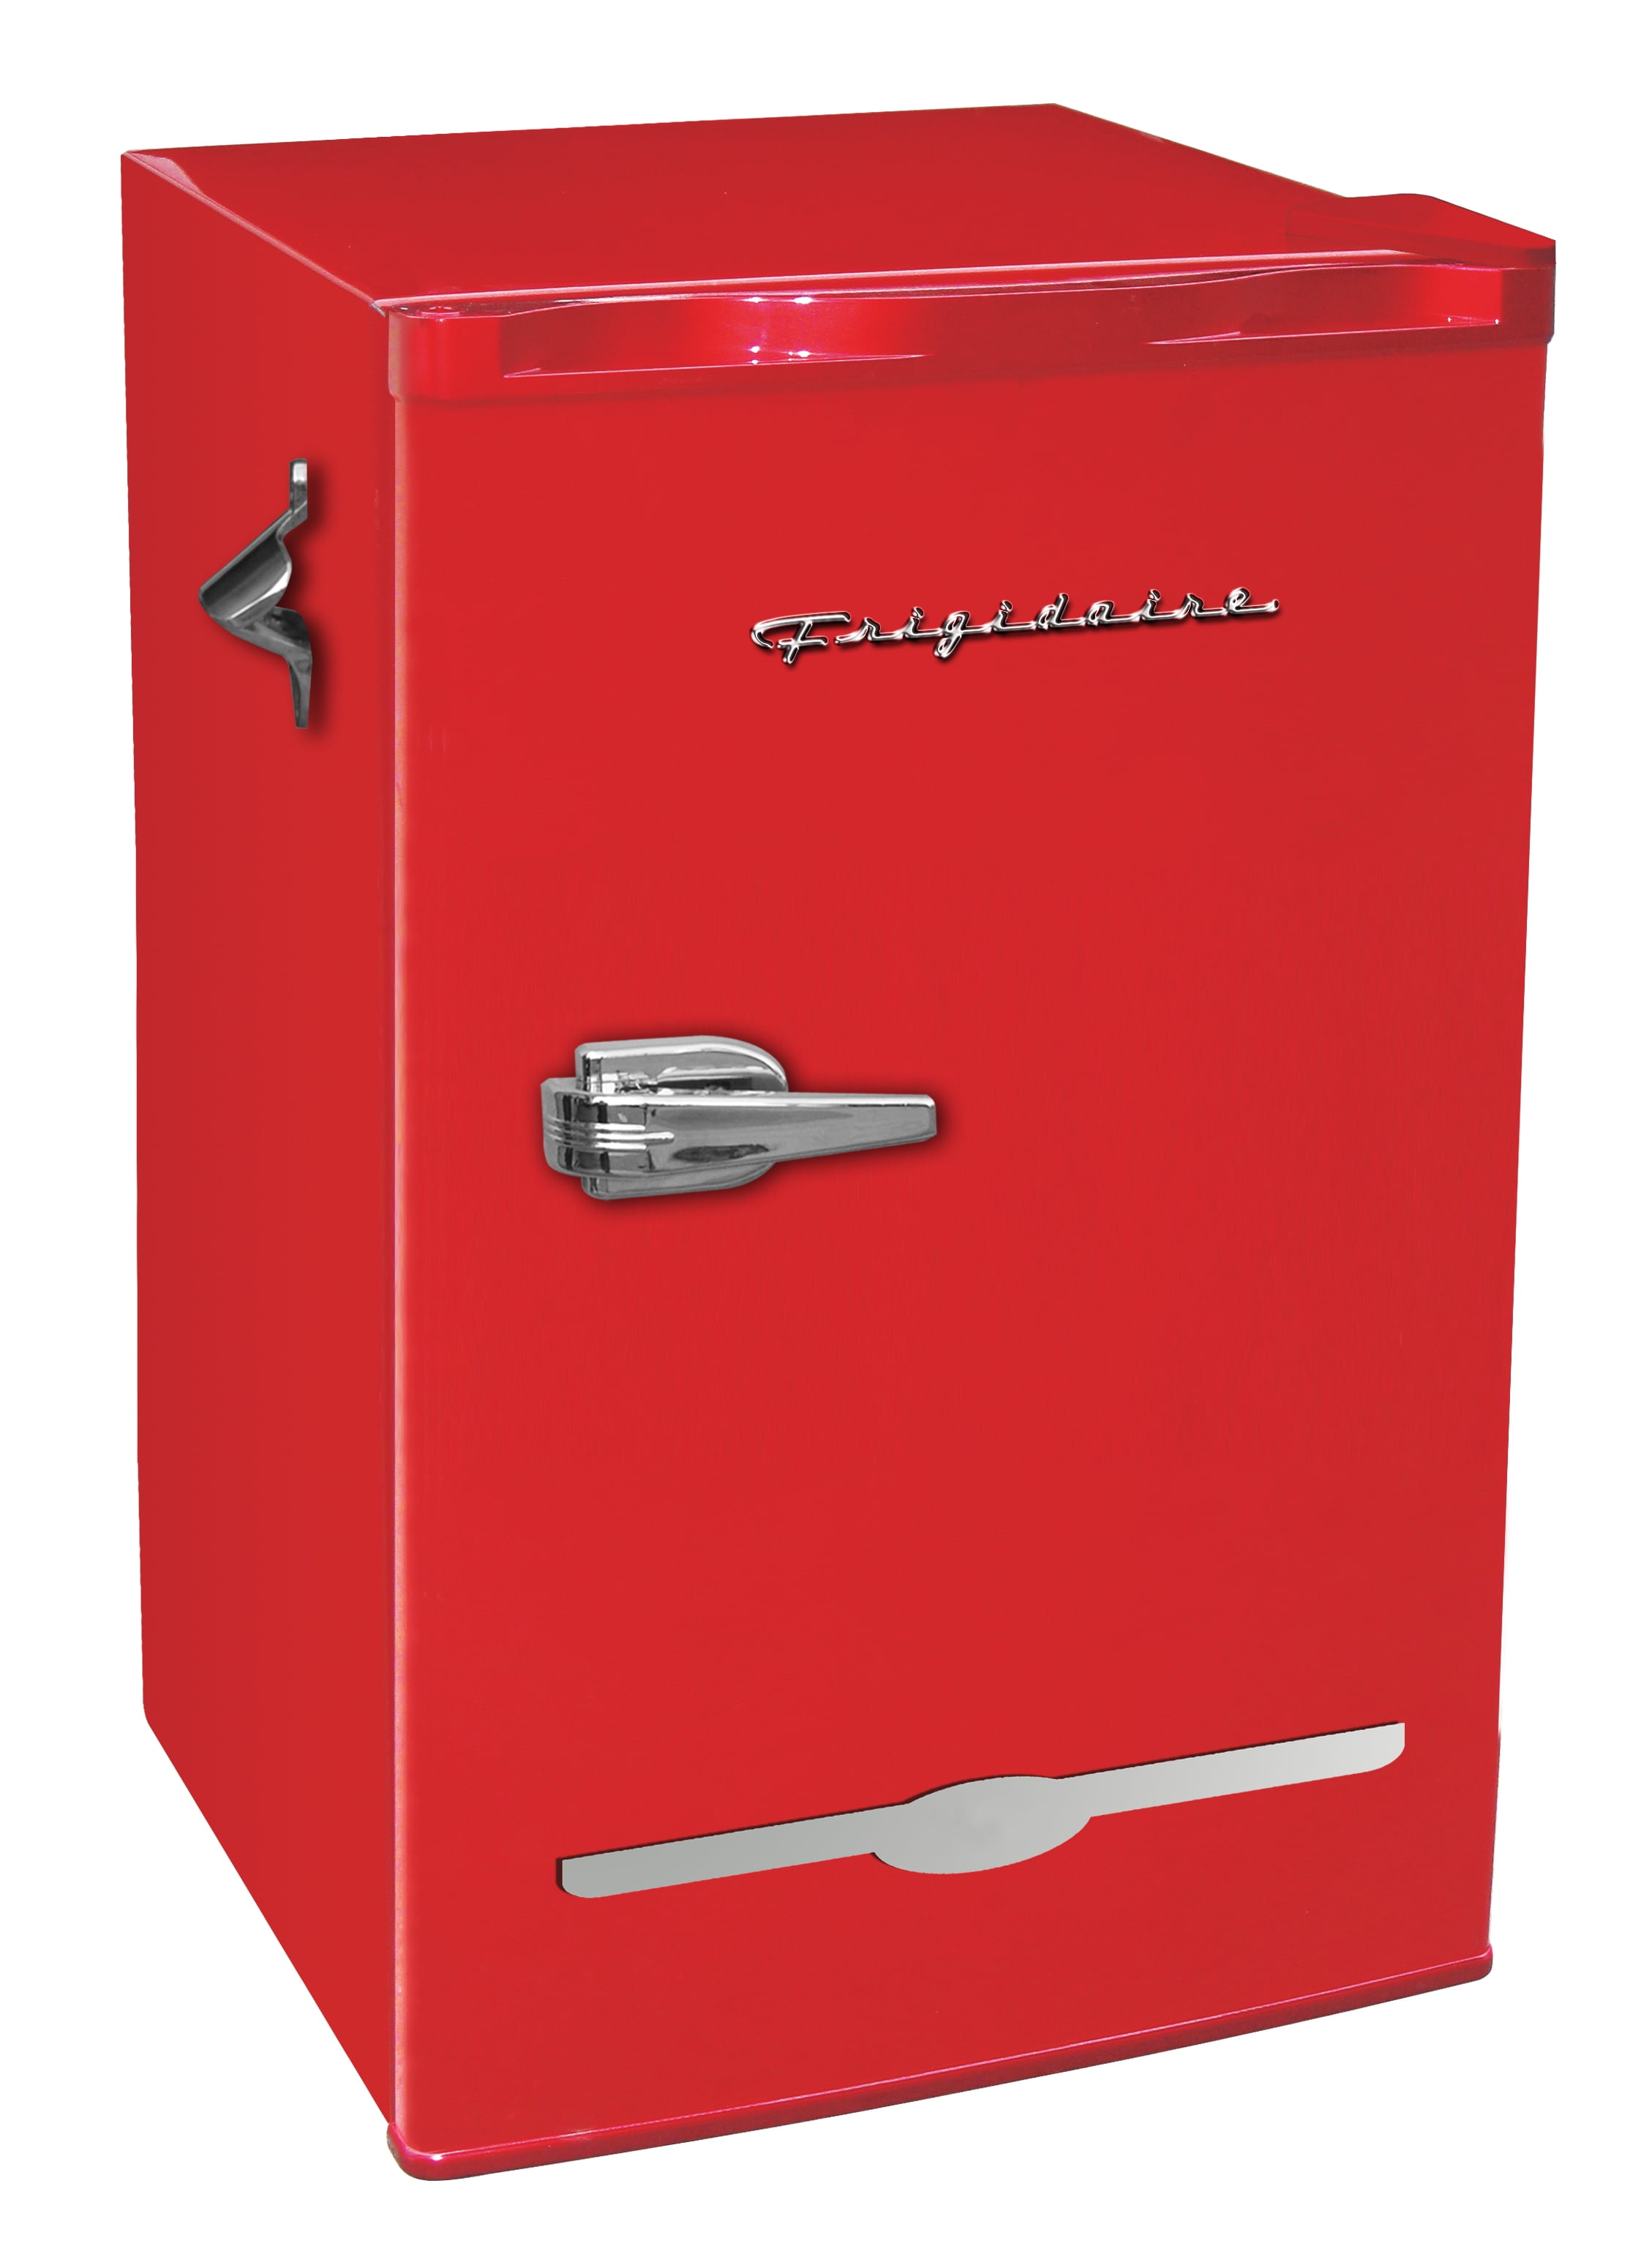 Photo 1 of (DAMAGE)Frigidaire 3.2 Cu. Ft. Retro Compact Refrigerator with Side Bottle Opener EFR376, Red
**DENT**